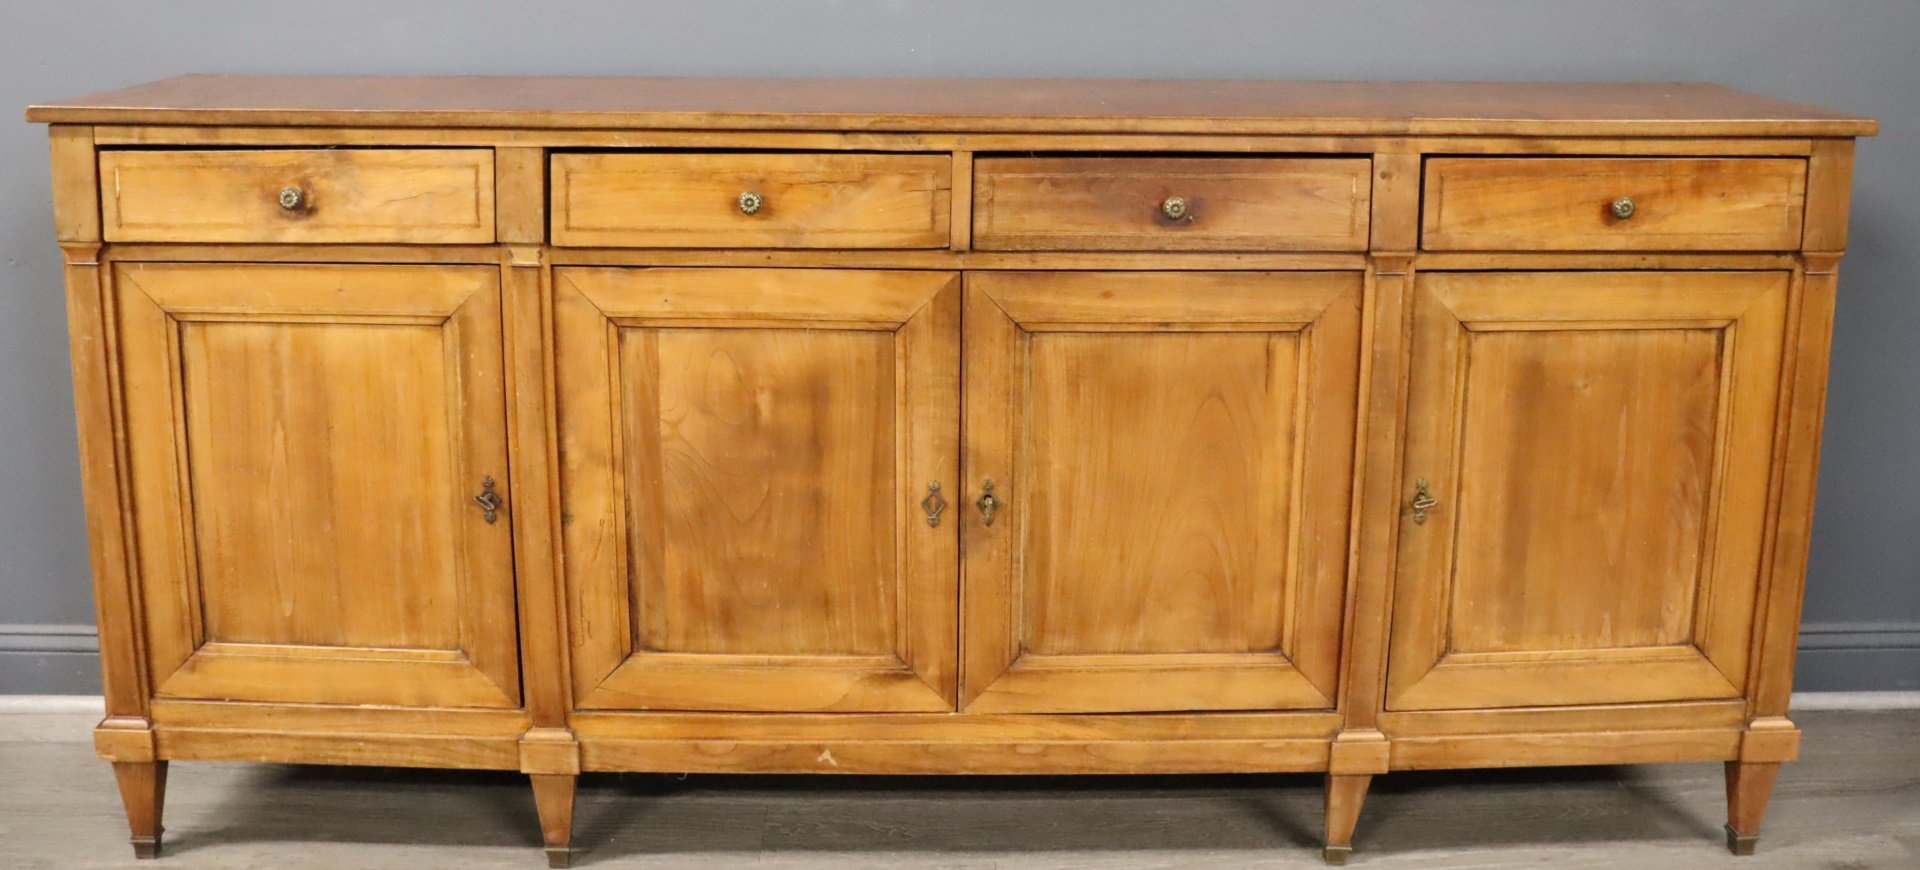 18TH / 19TH CENTURY FRENCH SIDEBOARD.